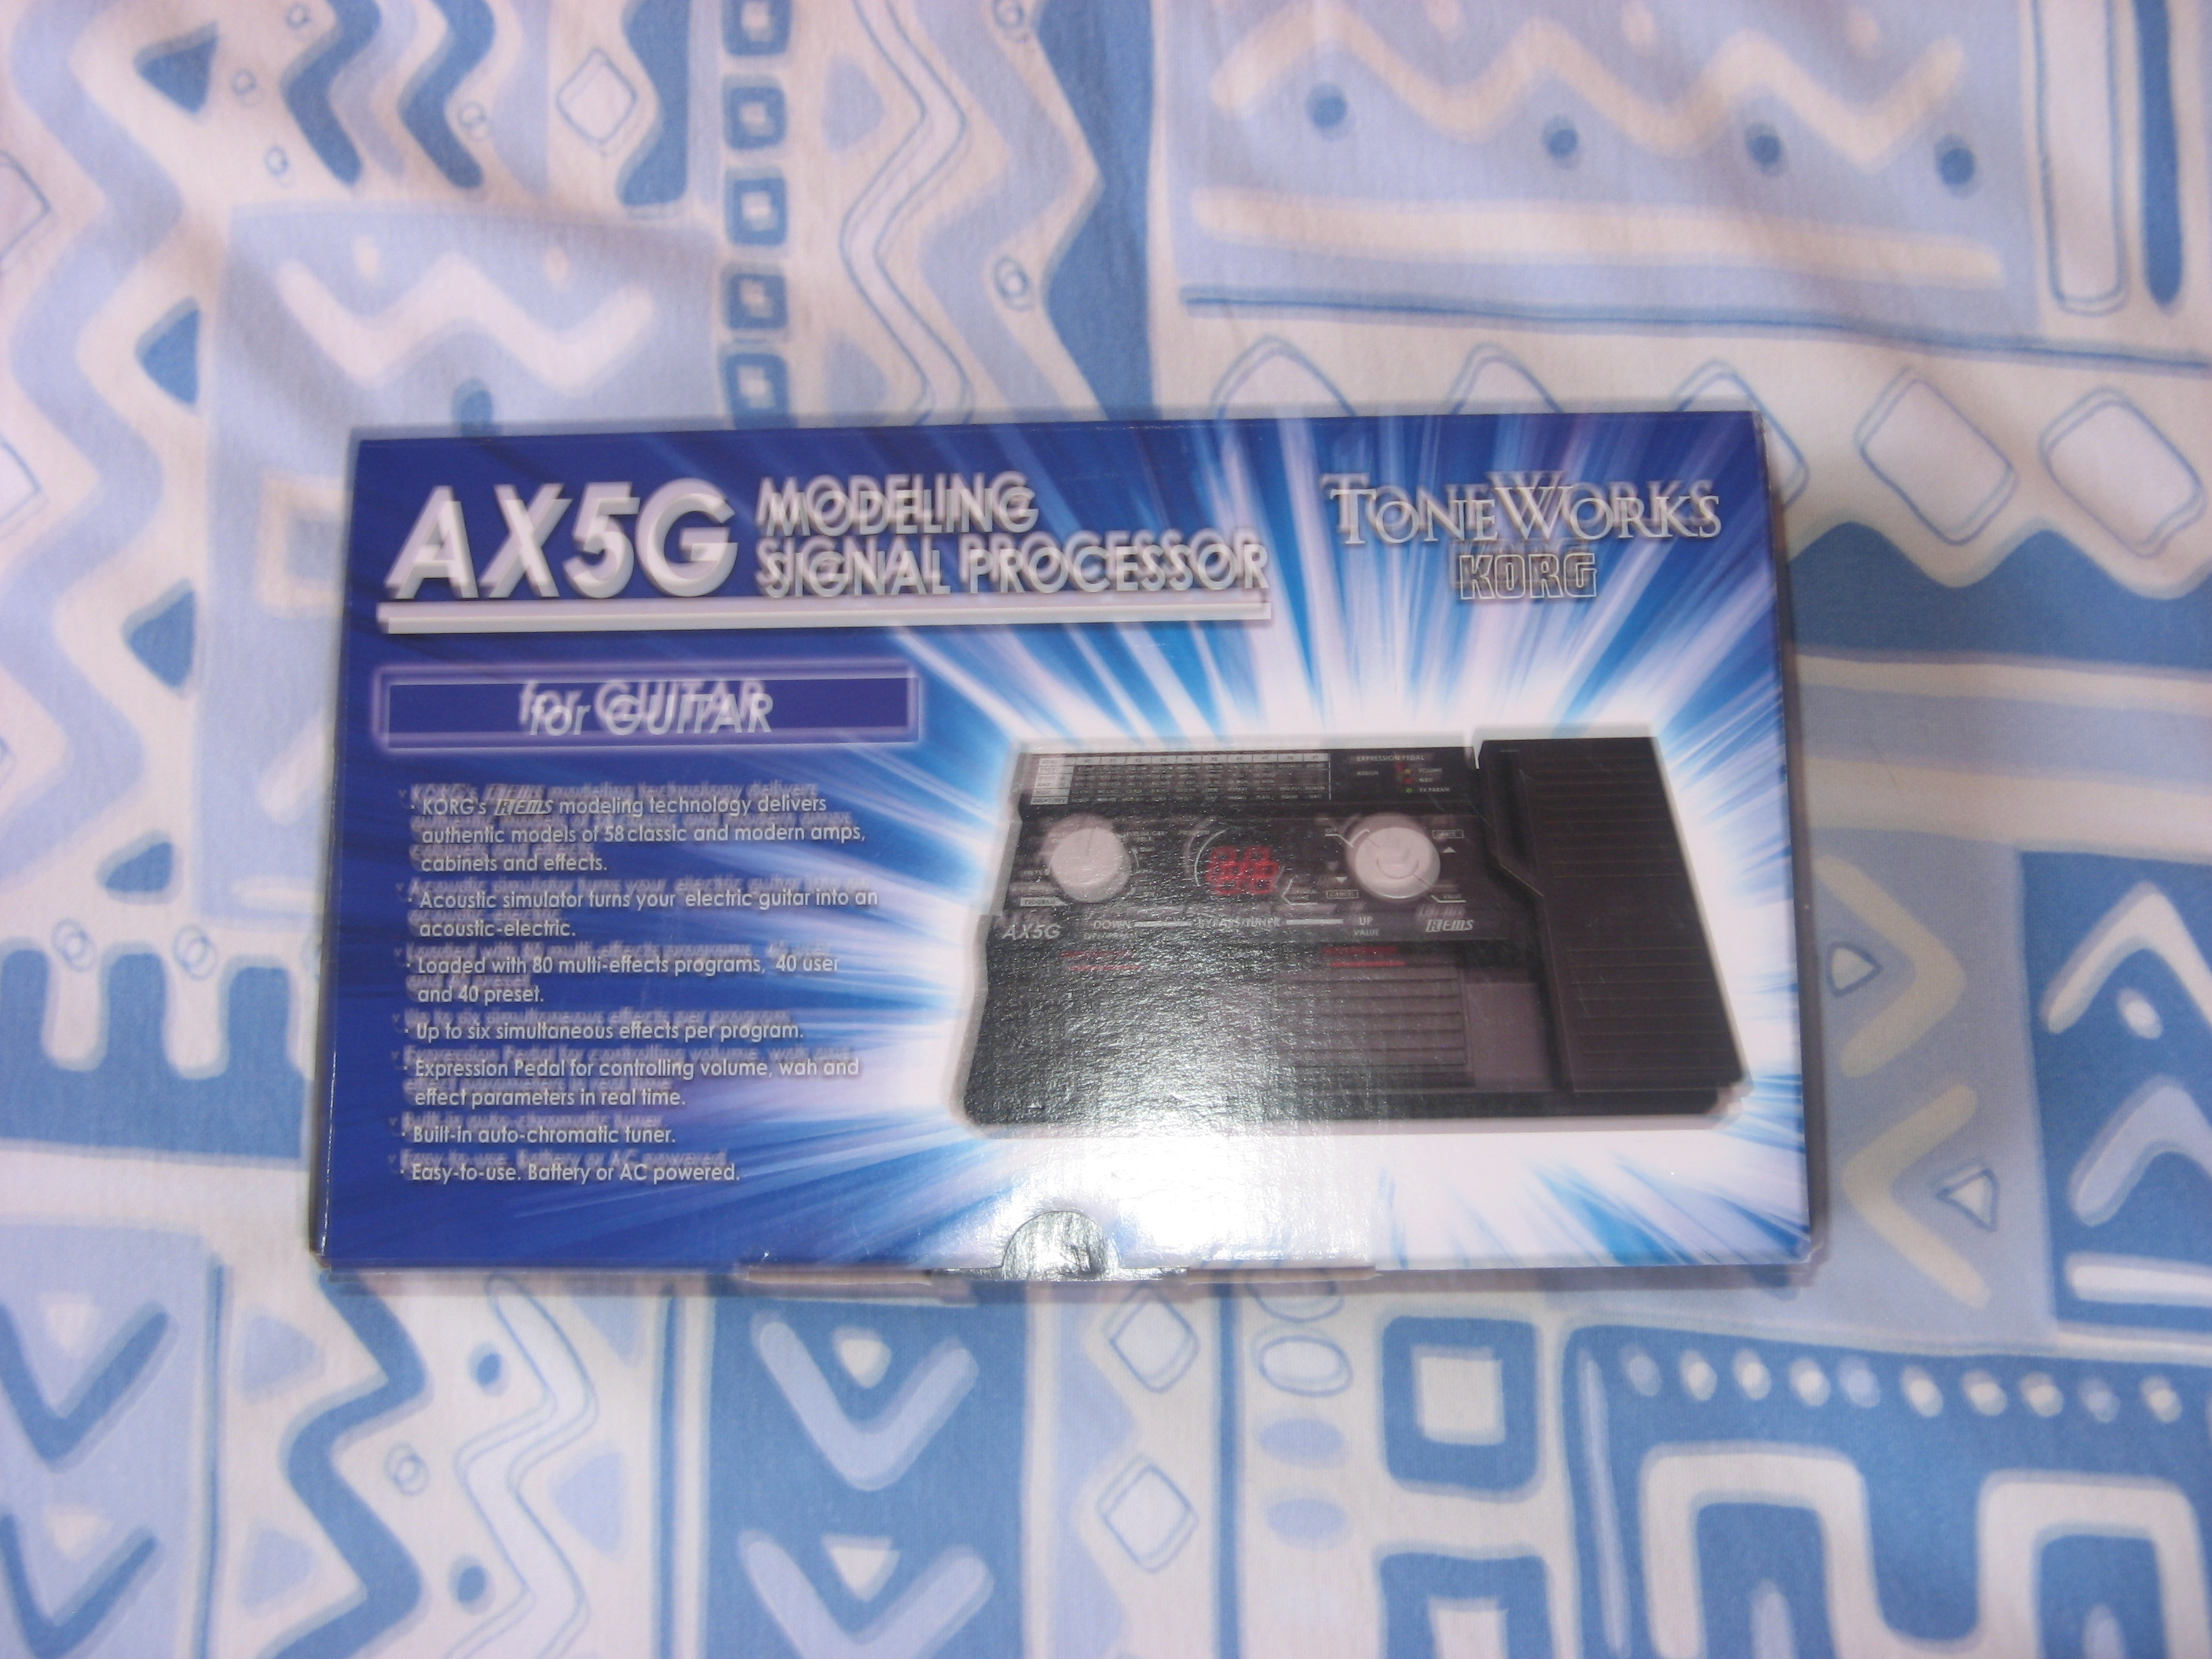 Guitar Patch For Korg Ax5g